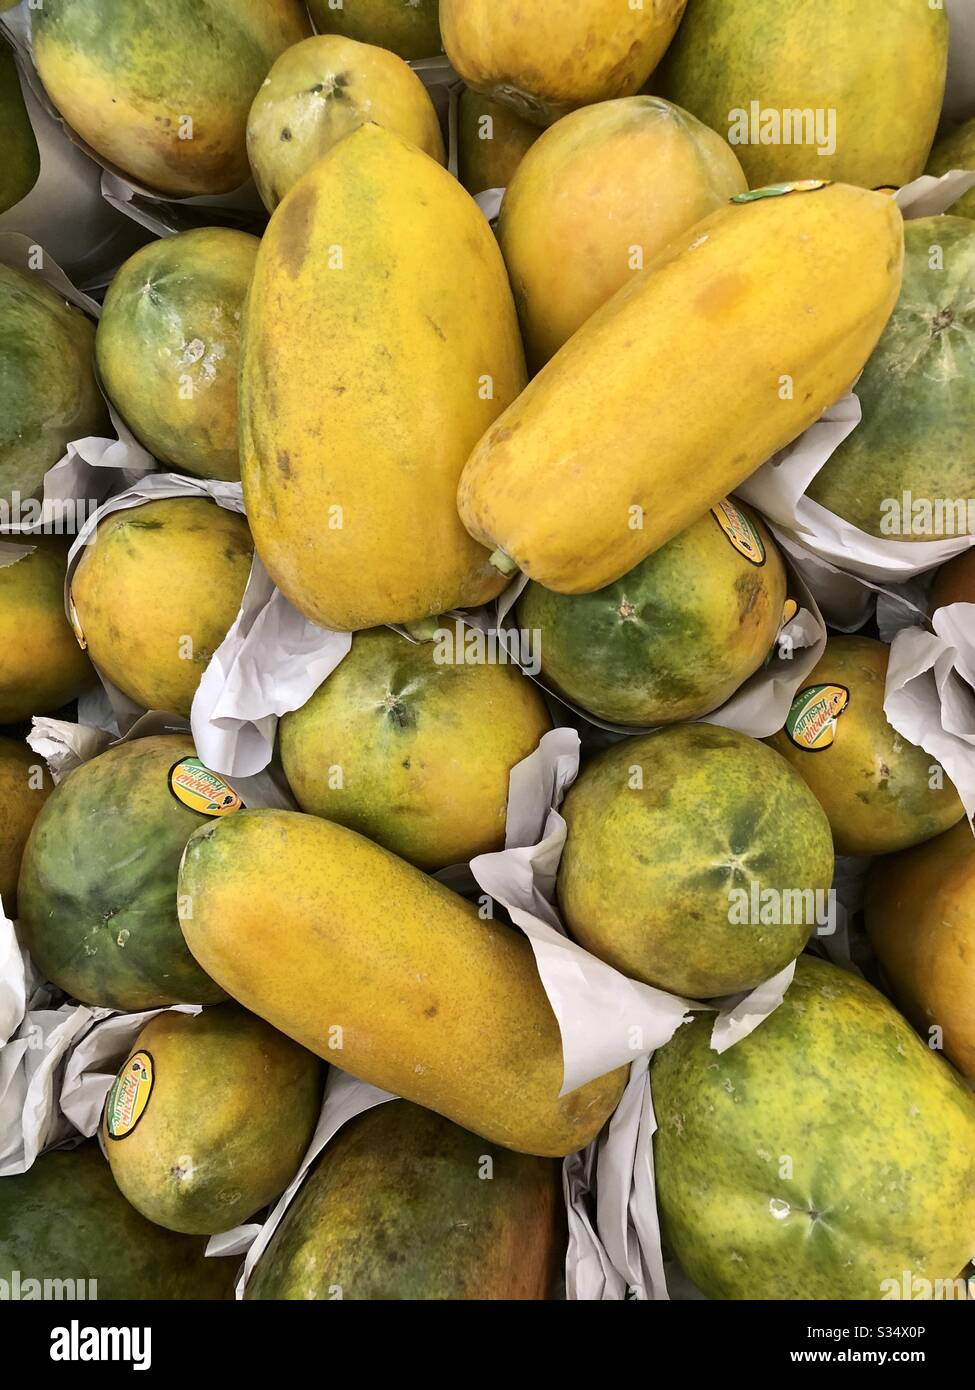 Papayas, fruit, food, store grouping, yellow as ripening, sold by the pound, tasty, nutritional, various ways to enjoy, closeup Stock Photo